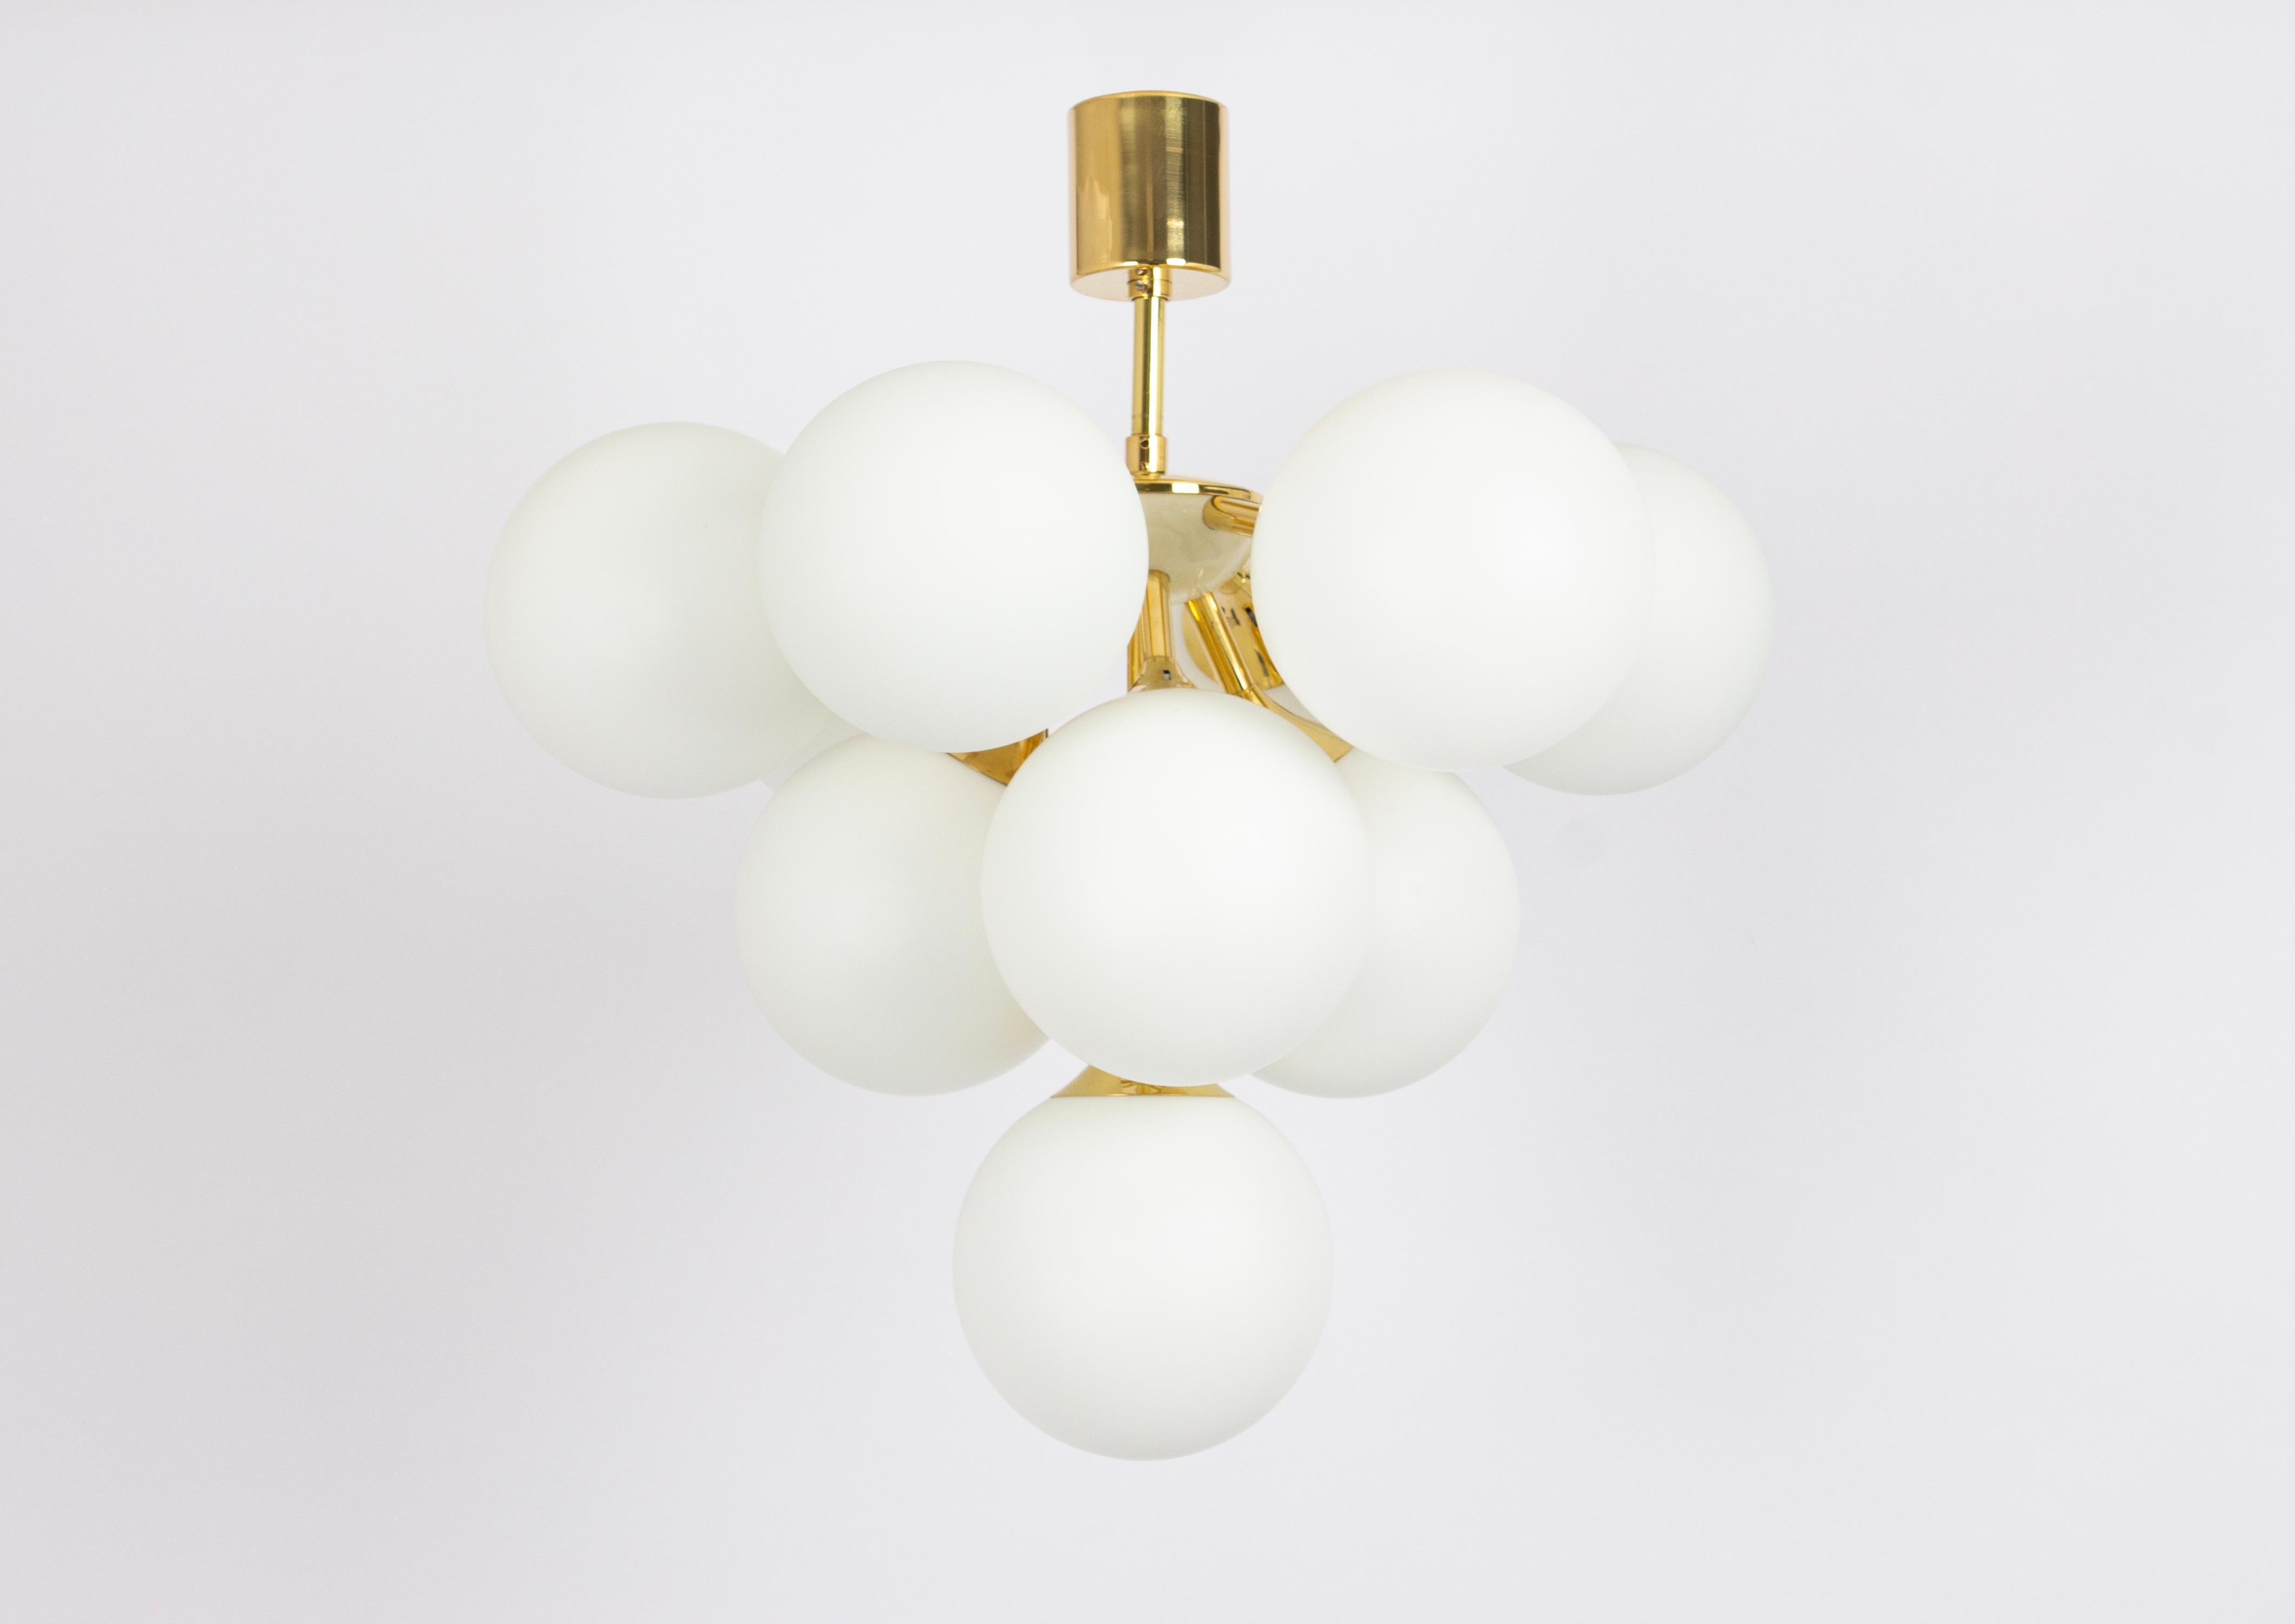 Stunning Sputnik brass chandelier with 10 opal glass globes by Kaiser Leuchten, Germany, 1970s.
High quality and in very good condition. Cleaned, well-wired, and ready to use. 

The fixture requires 10 x E14 small bulbs with 40W max each.
Light